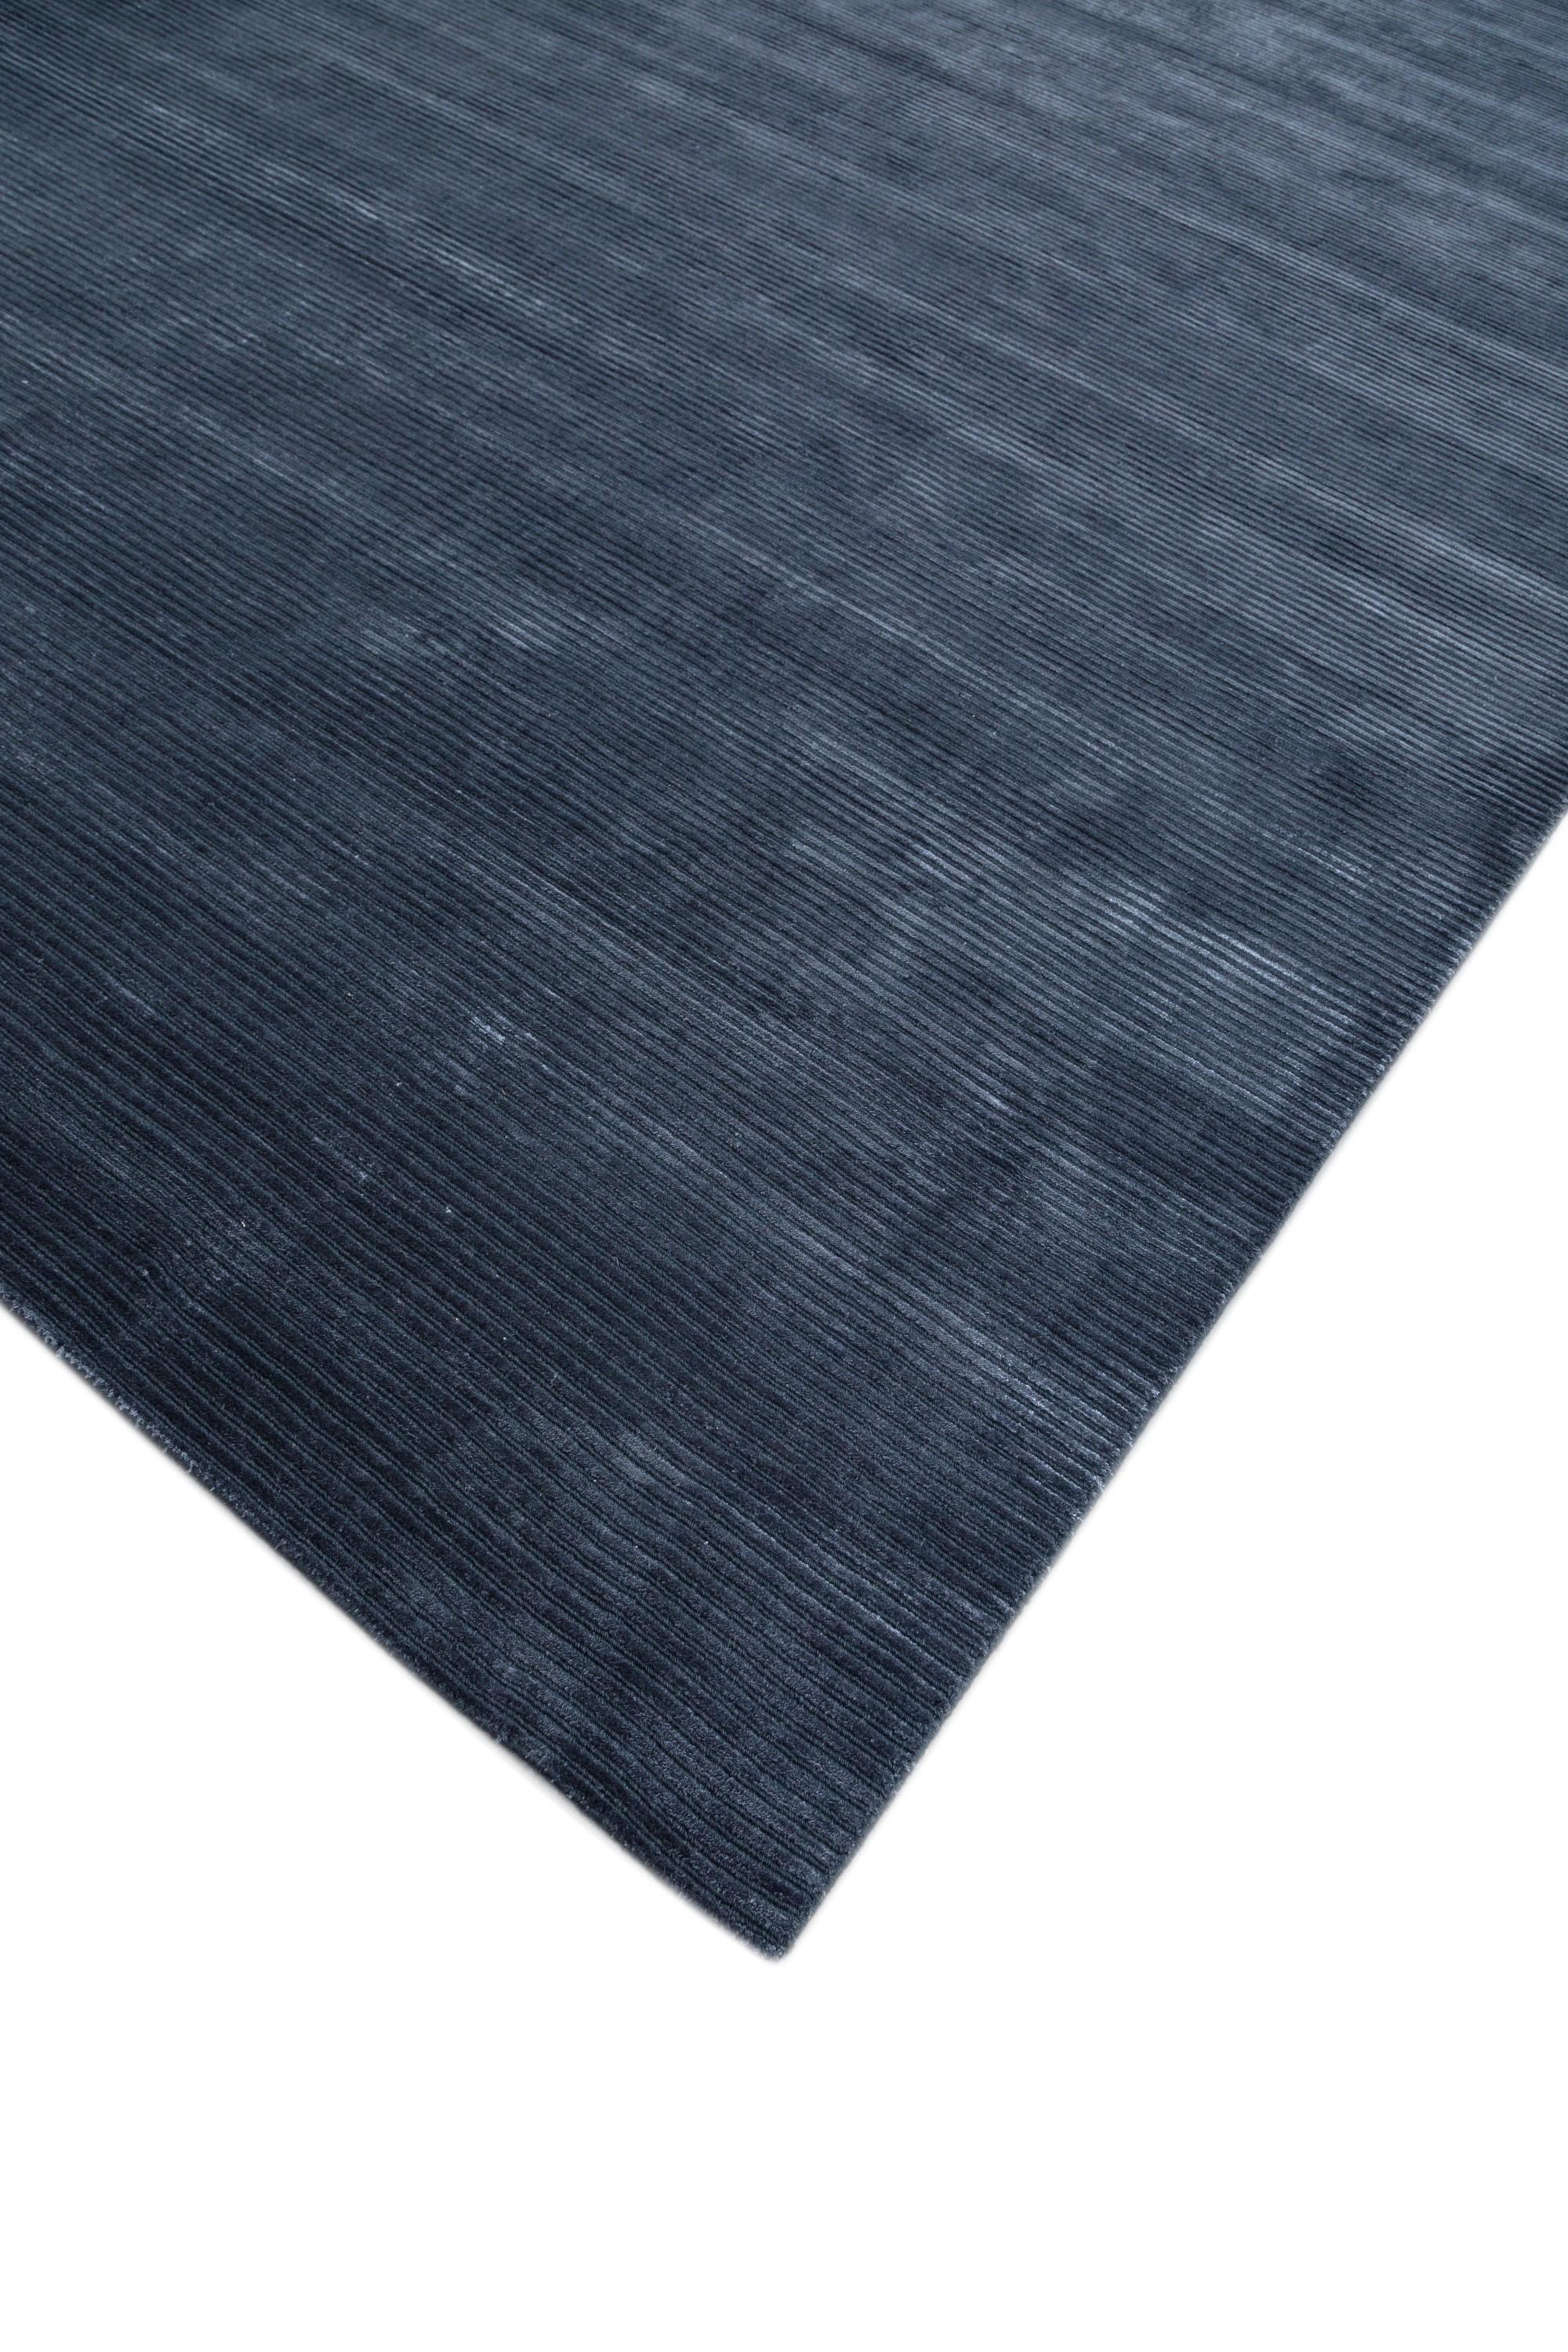 Like strokes of midnight ink on an artist's canvas, Jaipur Rugs unveils a hand-loomed masterpiece with a bold indigo blue tone-on-tone color scheme. This lightly-distressed, modern rug, crafted from a luxurious blend of wool and viscose, presents a